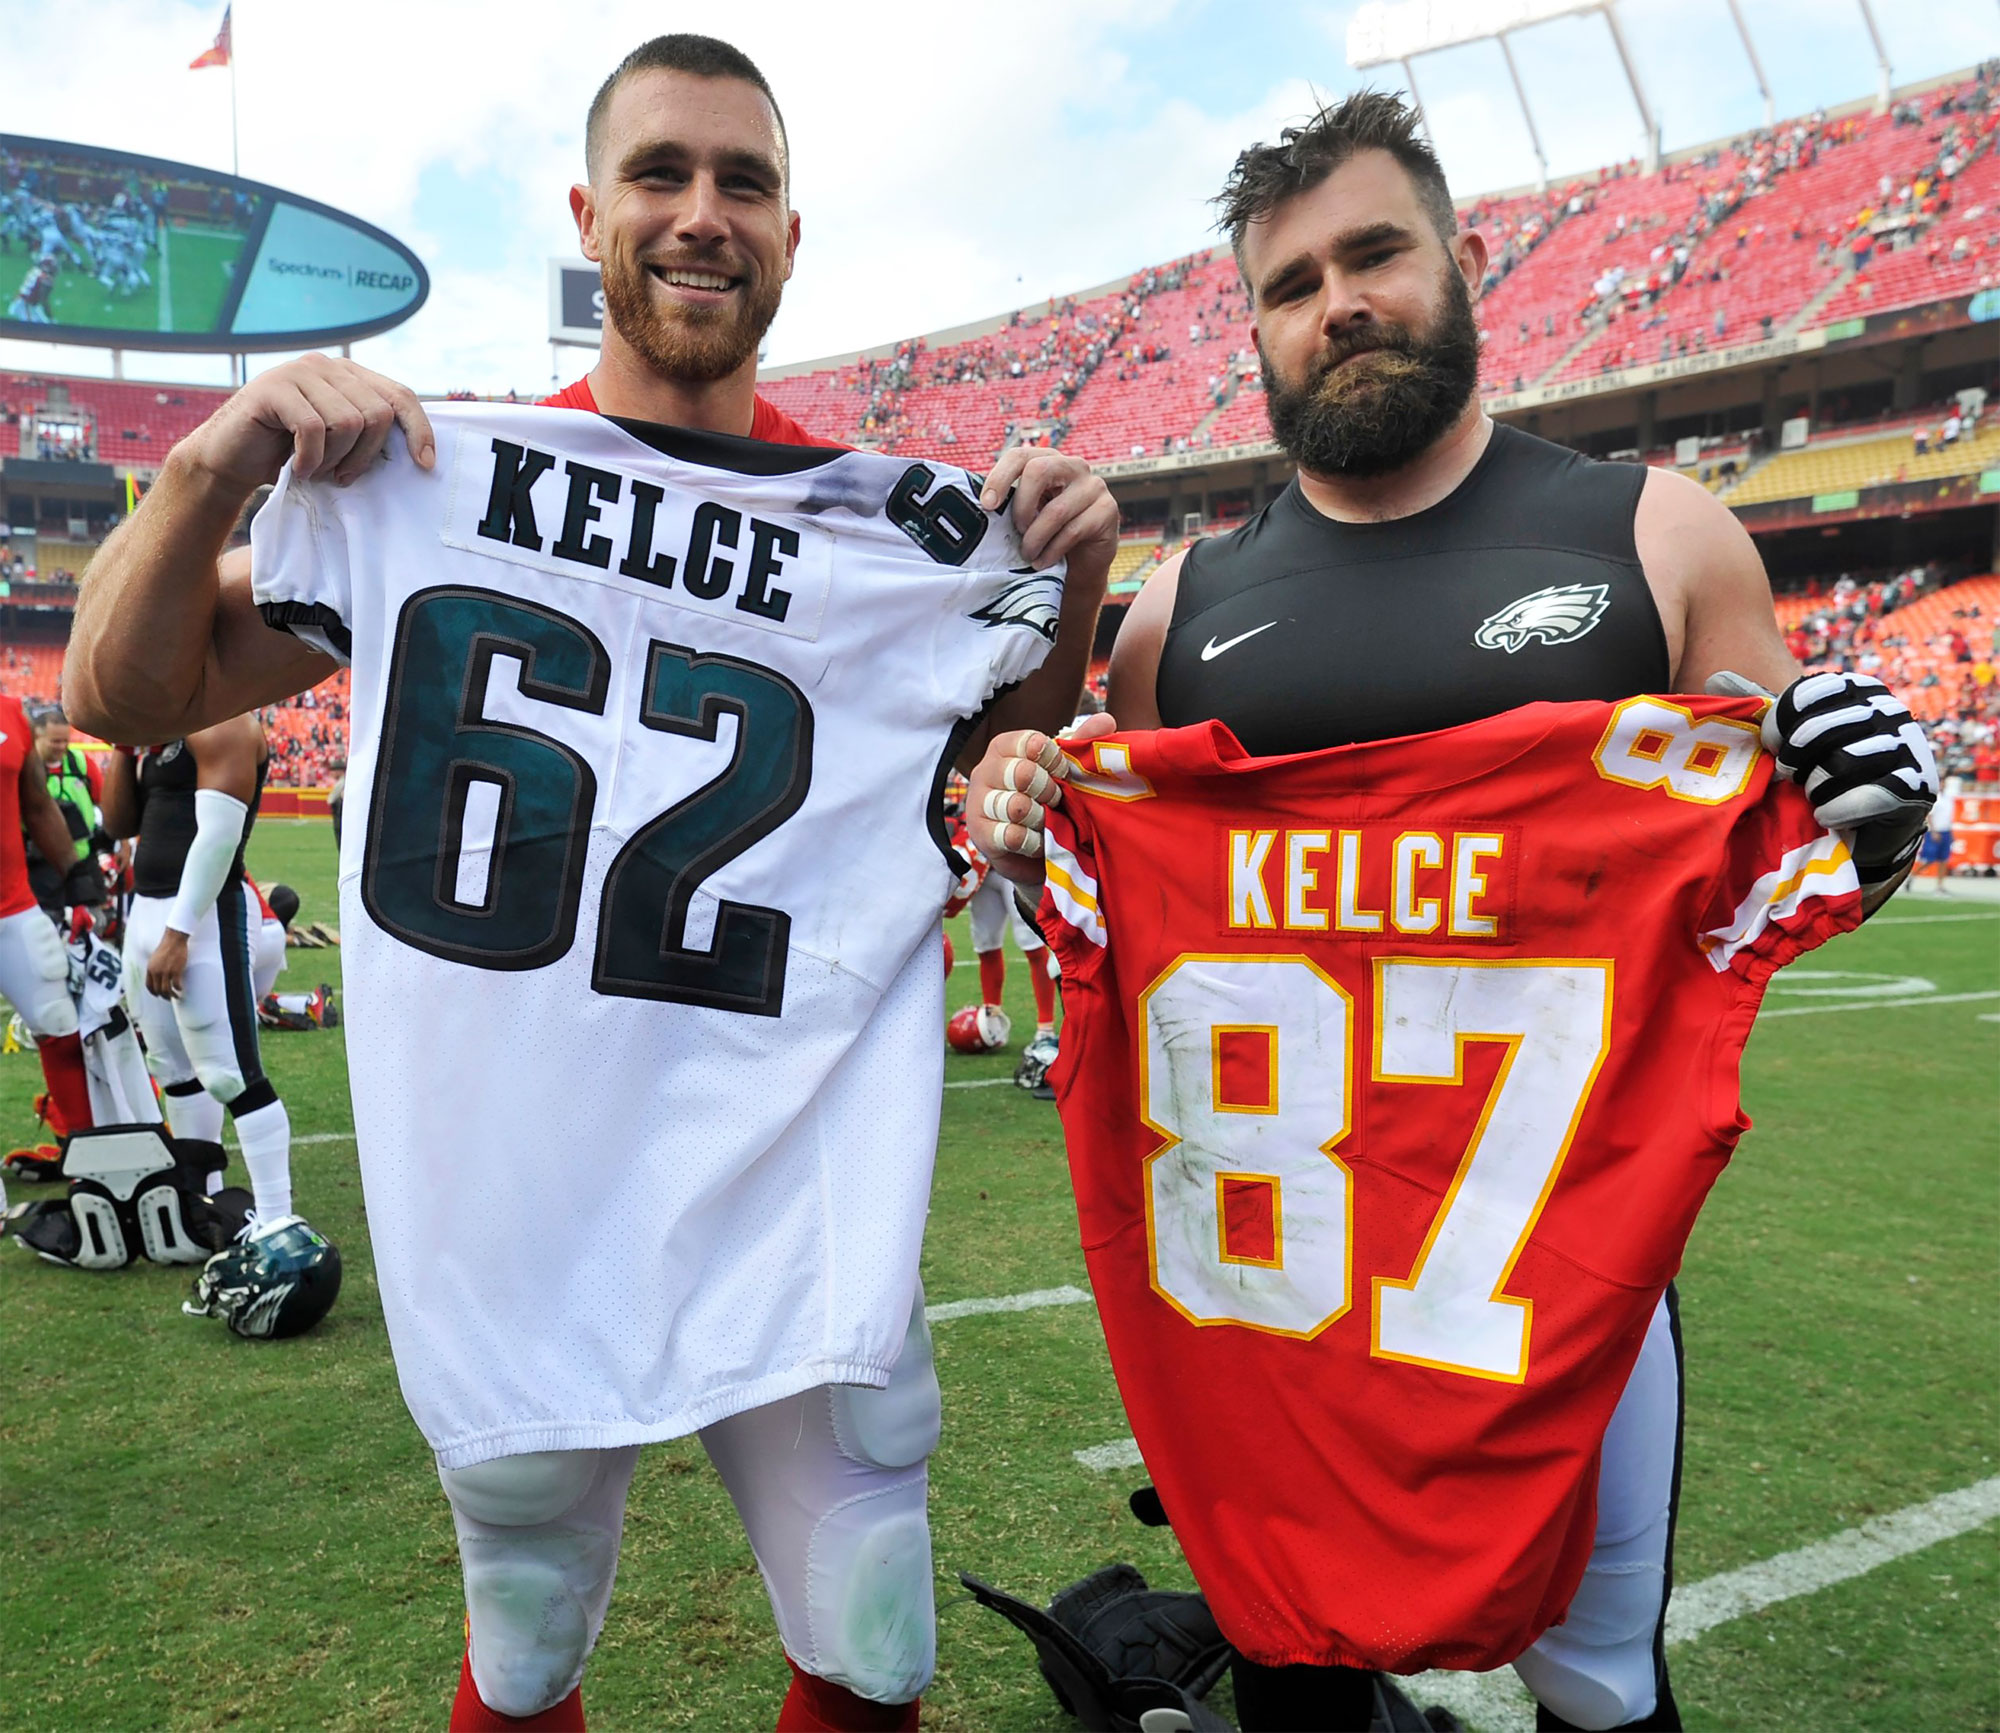 Mother of Travis, Jason Kelce wears great custom shoes, outfit to